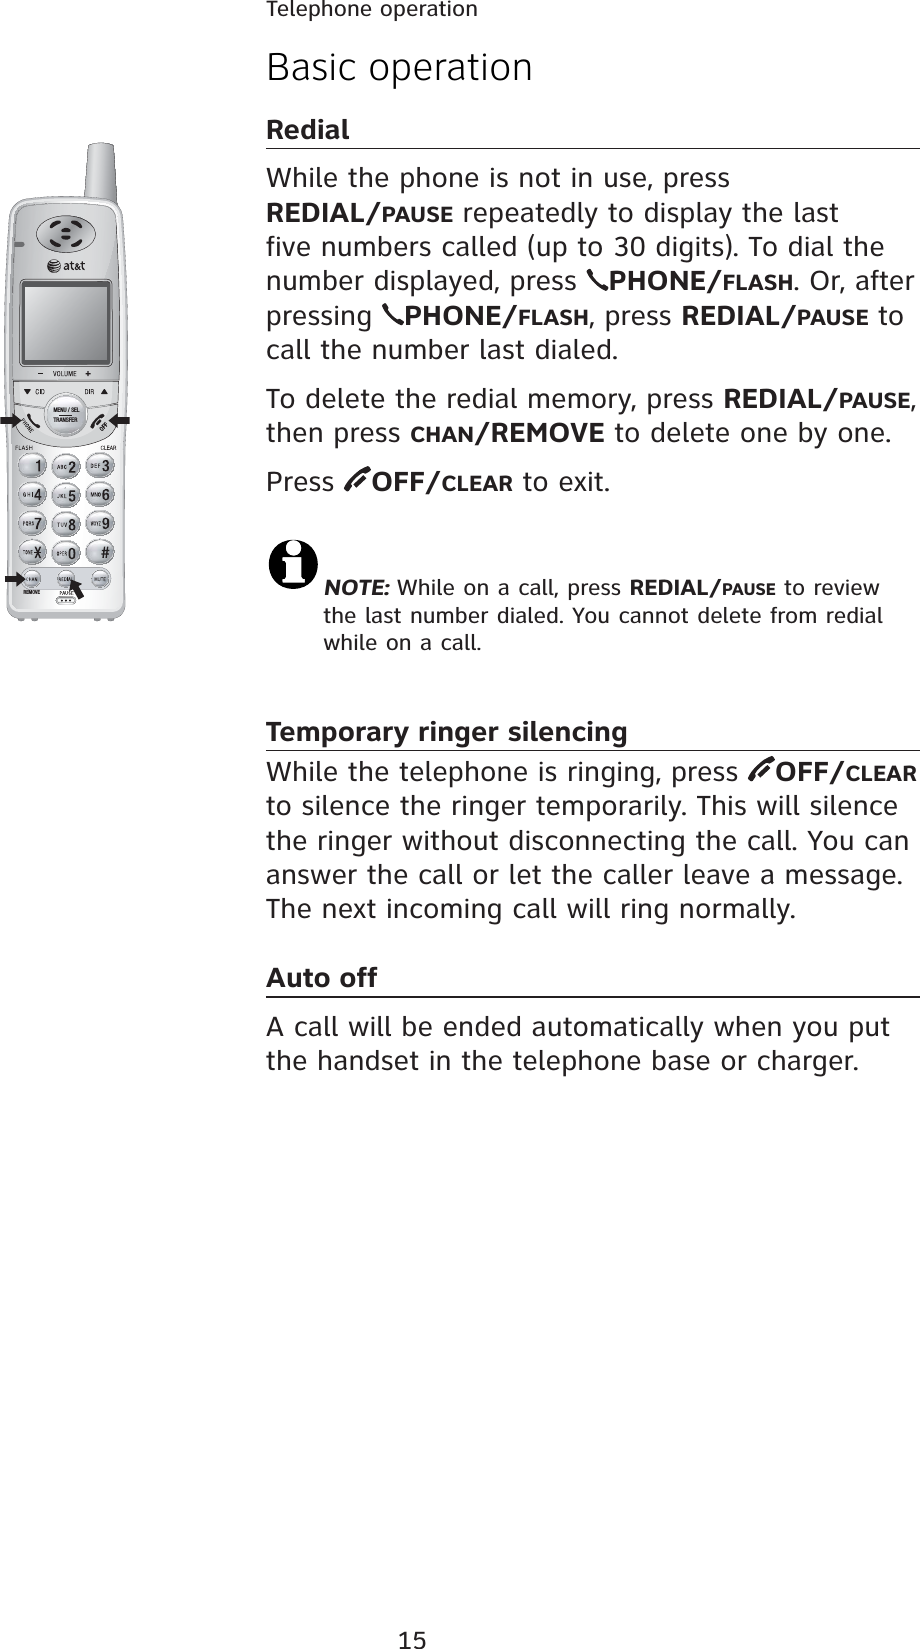 15REMOVEMENU / SELTRANSFERBasic operationRedialWhile the phone is not in use, press  REDIAL/PAUSE repeatedly to display the last five numbers called (up to 30 digits). To dial the number displayed, press  PHONE/FLASH. Or, after pressing  PHONE/FLASH, press REDIAL/PAUSE to call the number last dialed.To delete the redial memory, press REDIAL/PAUSE, then press CHAN/REMOVE to delete one by one. Press  OFF/CLEAR to exit.NOTE: While on a call, press REDIAL/PAUSE to review the last number dialed. You cannot delete from redial while on a call.Temporary ringer silencingWhile the telephone is ringing, press  OFF/CLEAR to silence the ringer temporarily. This will silence the ringer without disconnecting the call. You can answer the call or let the caller leave a message. The next incoming call will ring normally.Auto offA call will be ended automatically when you put the handset in the telephone base or charger.Telephone operation